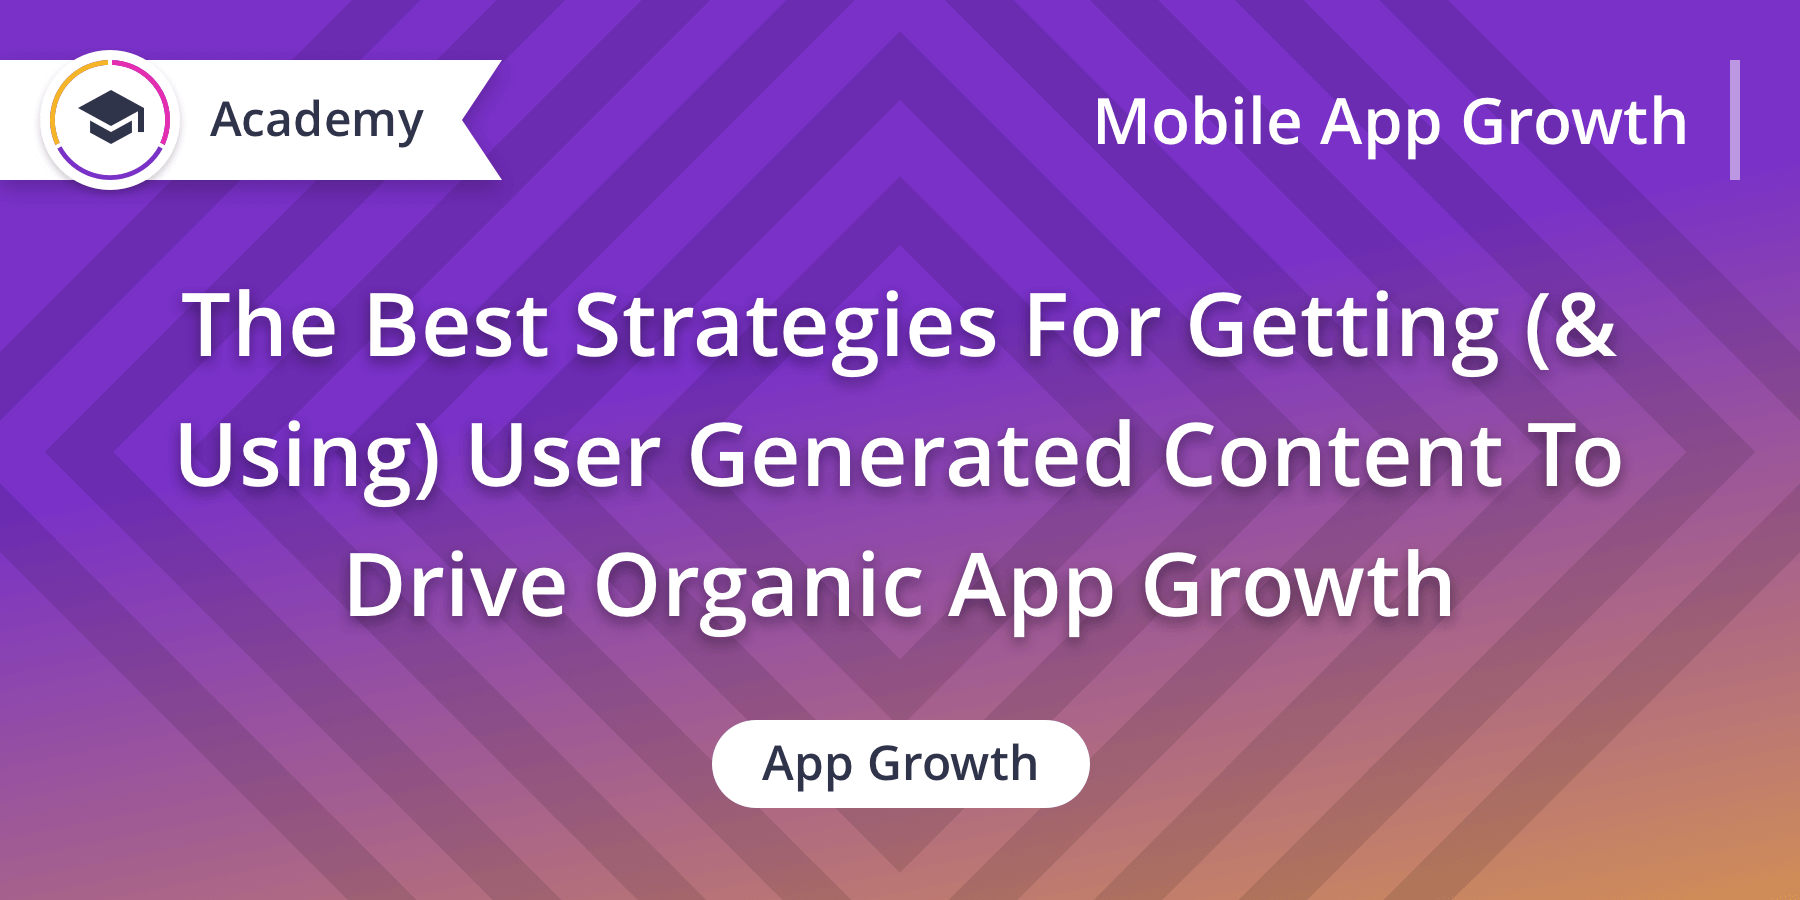 The Best Strategies For Getting (& Using) User Generated Content To Drive Organic App Growth